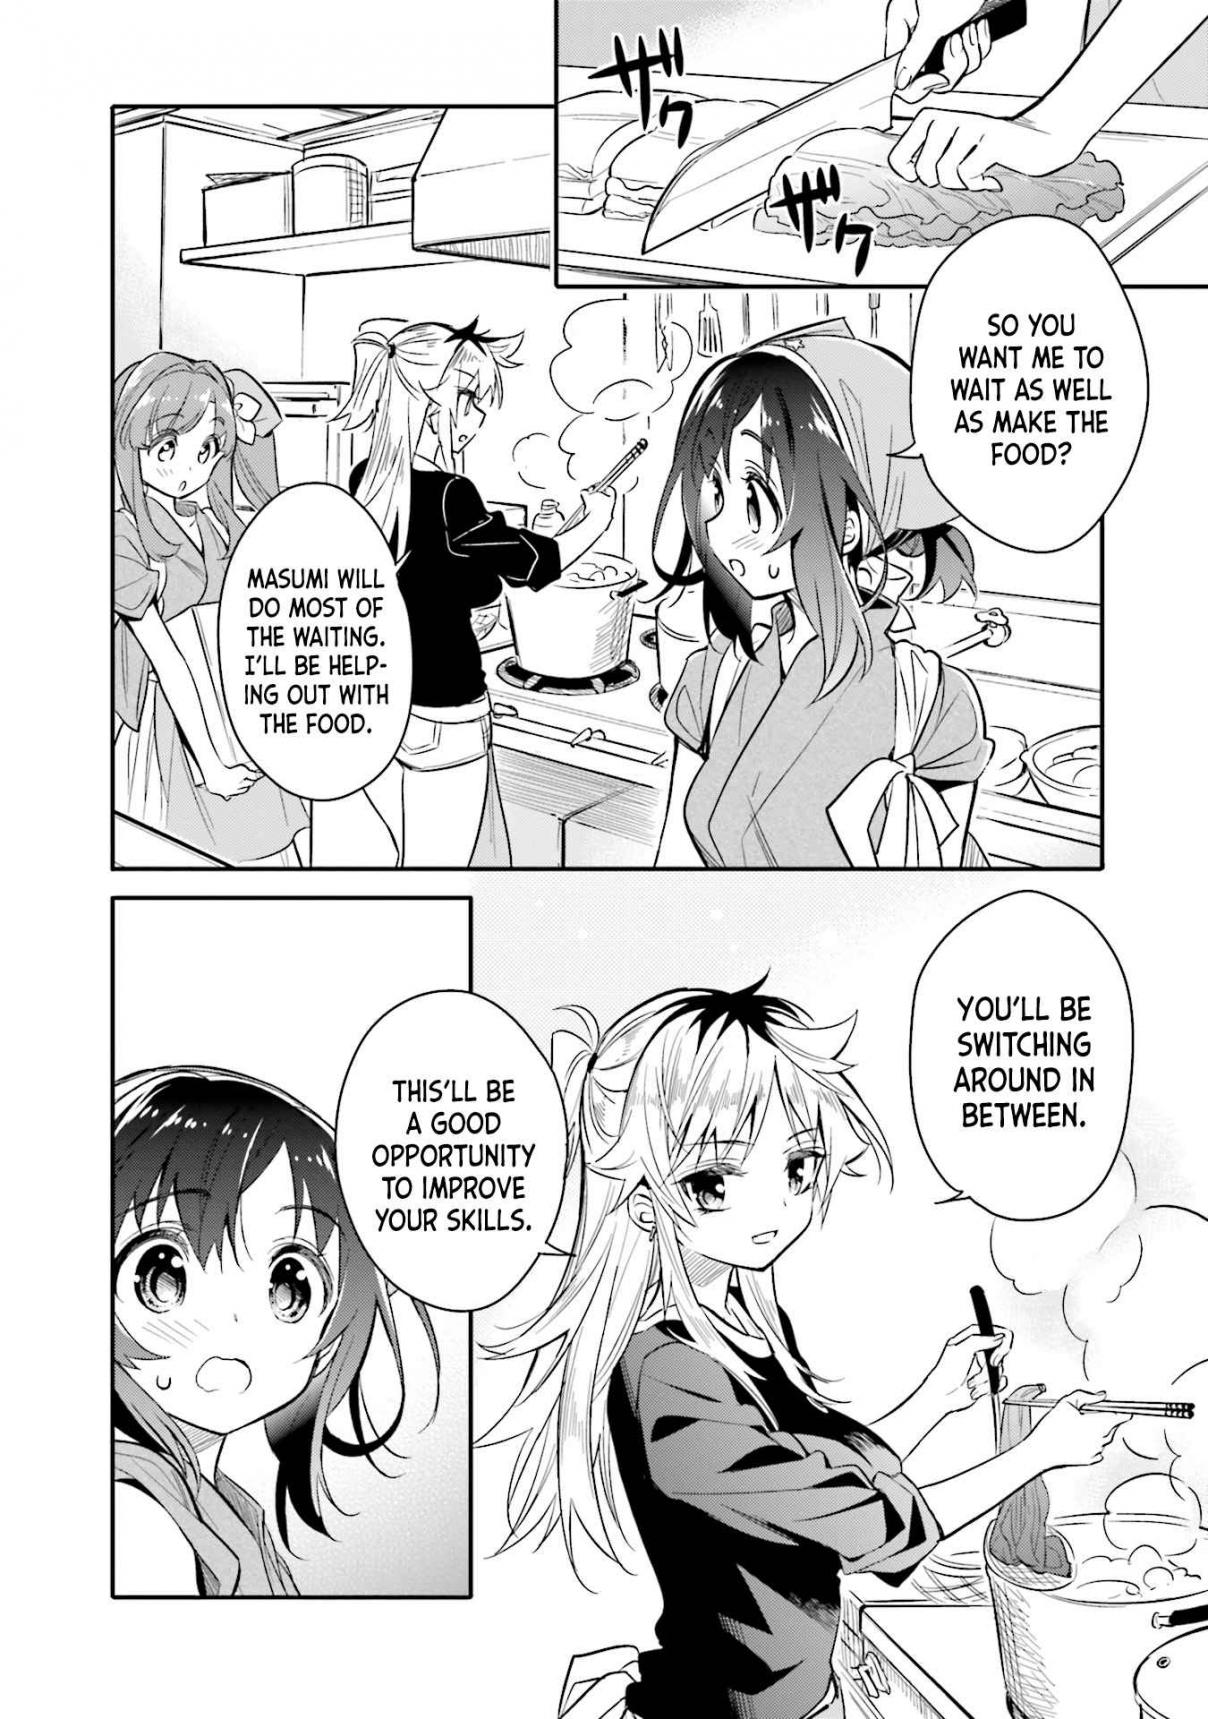 Chotto Ippai! Vol. 2 Ch. 8 I want to help out